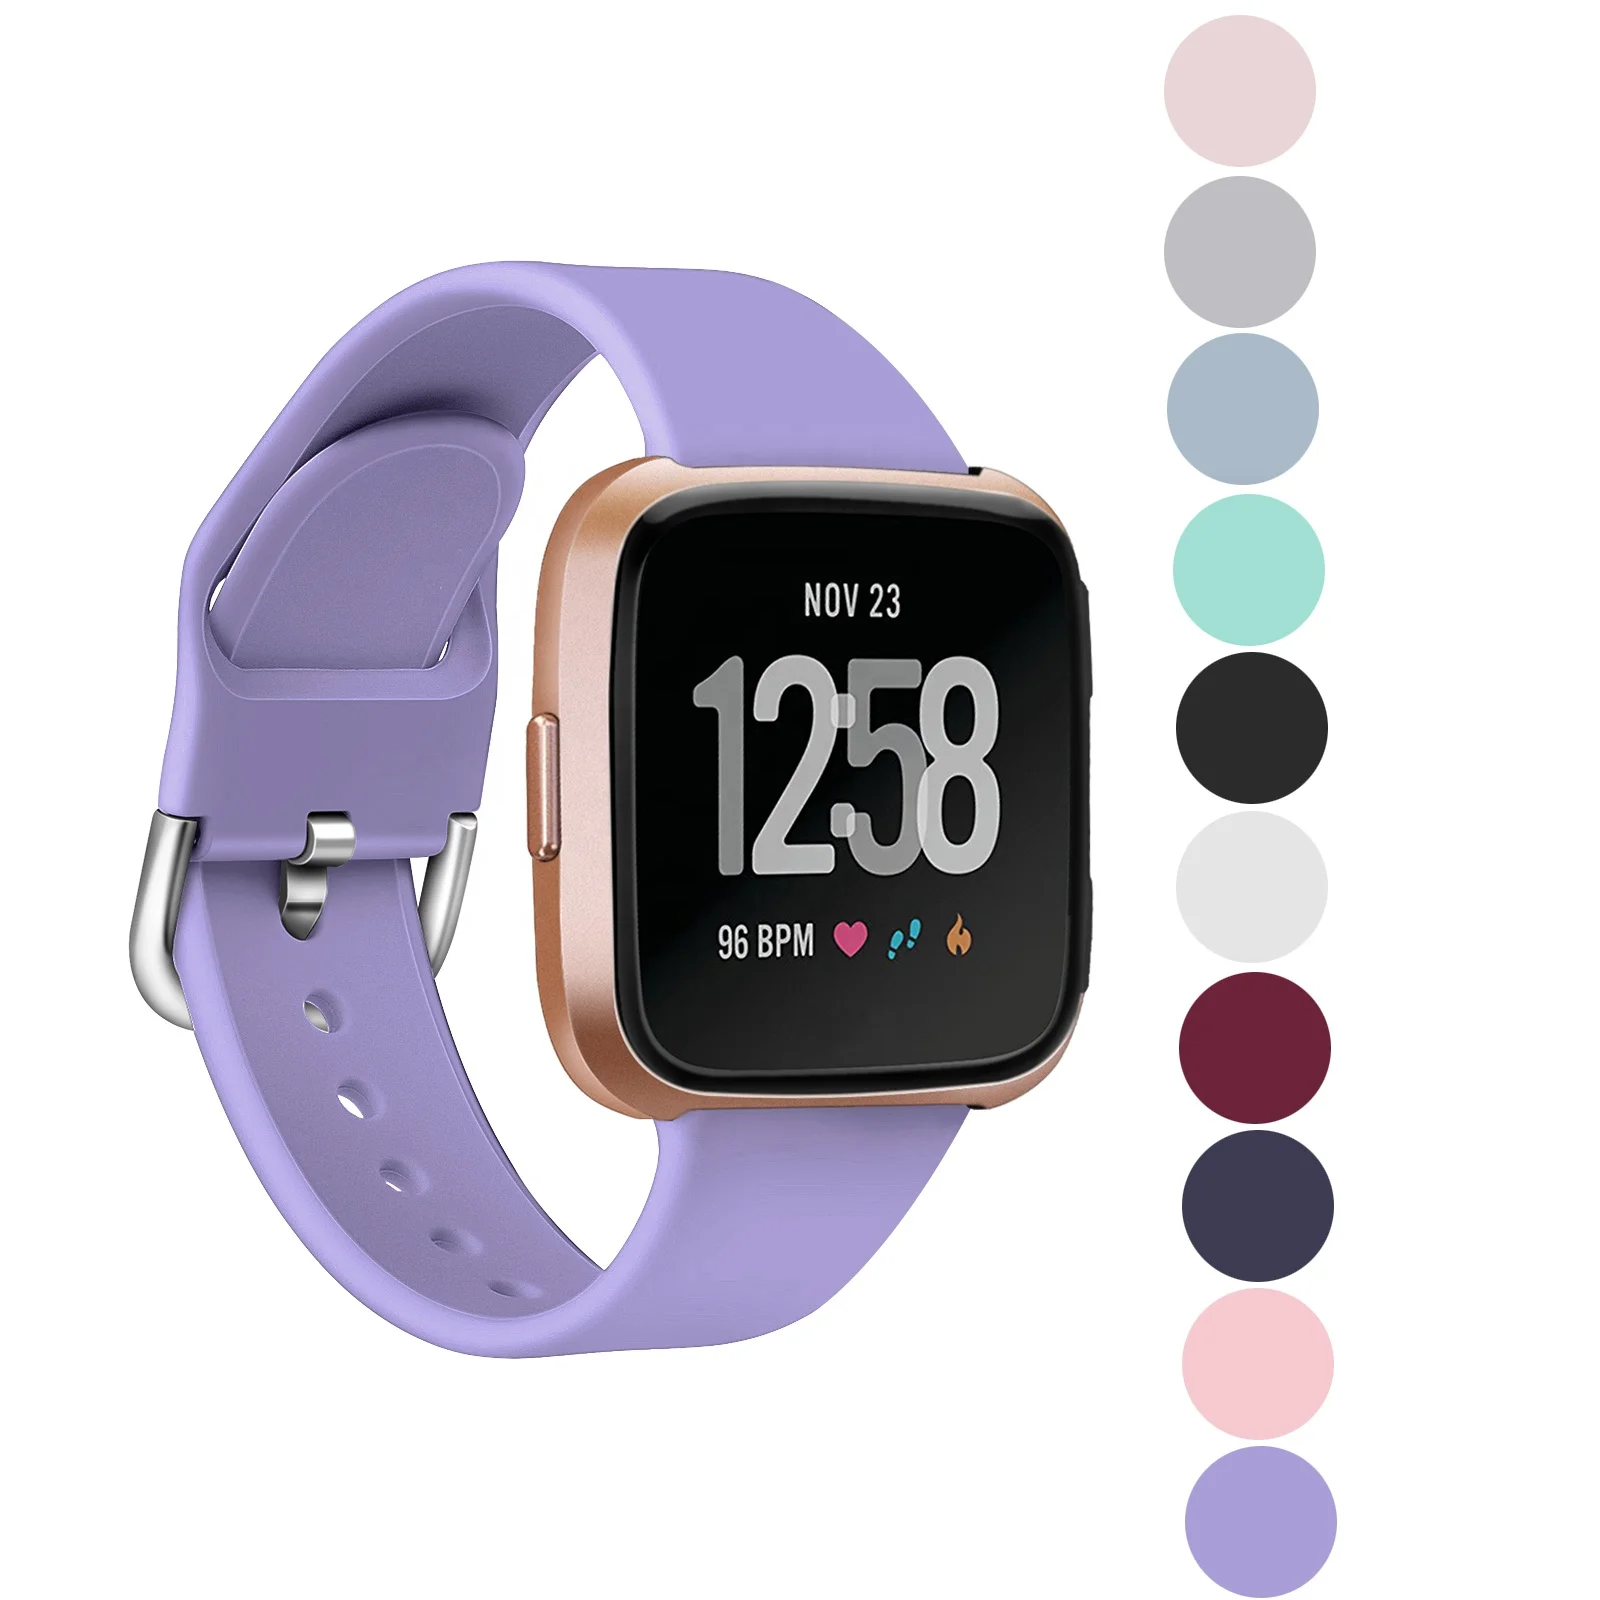 

22mm Bracelet Straps for Fitbit Versa/Versa Lite Watch 23mm Pin Buckle Quick Release Rubber Wrist Band Silicone Wristband, 10 colors